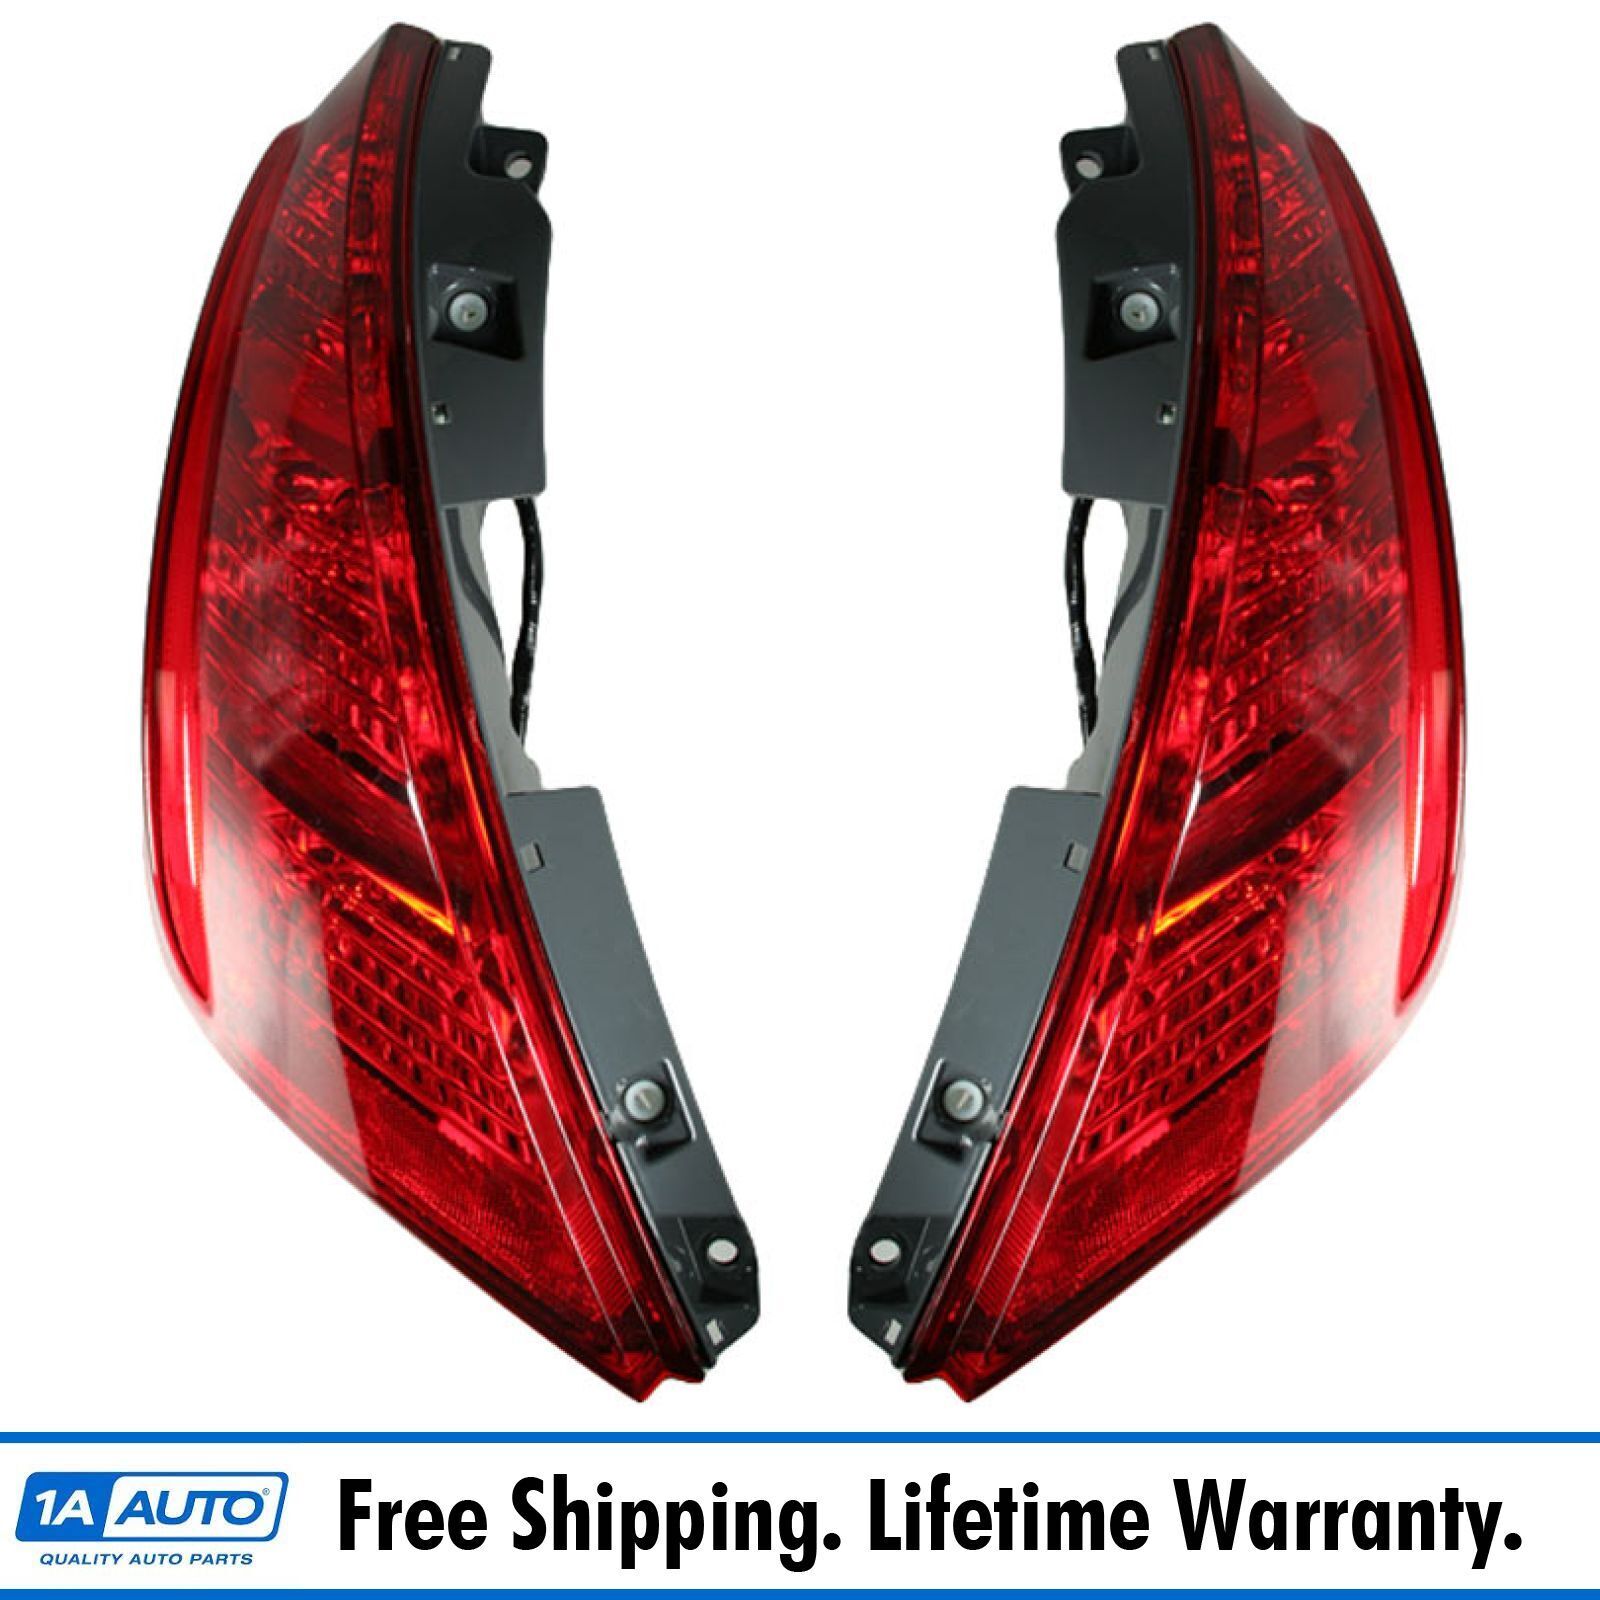 Taillight Tail Light Lamp Pair Set For Nissan Murano 03-05